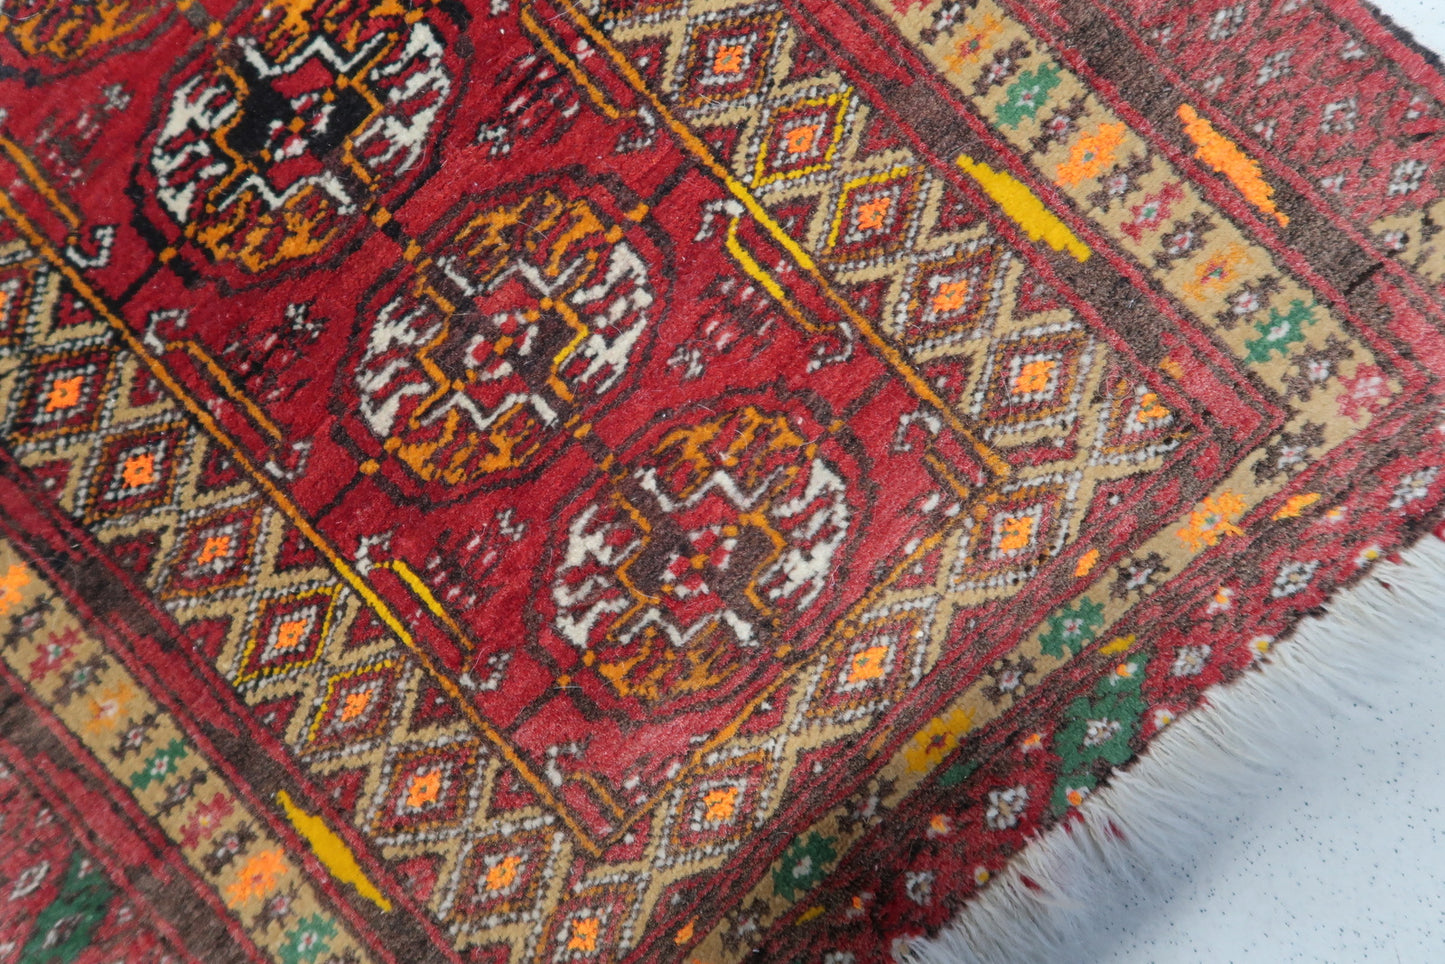 Close-up of the yellow and green colors on the Afghan Ersari mat